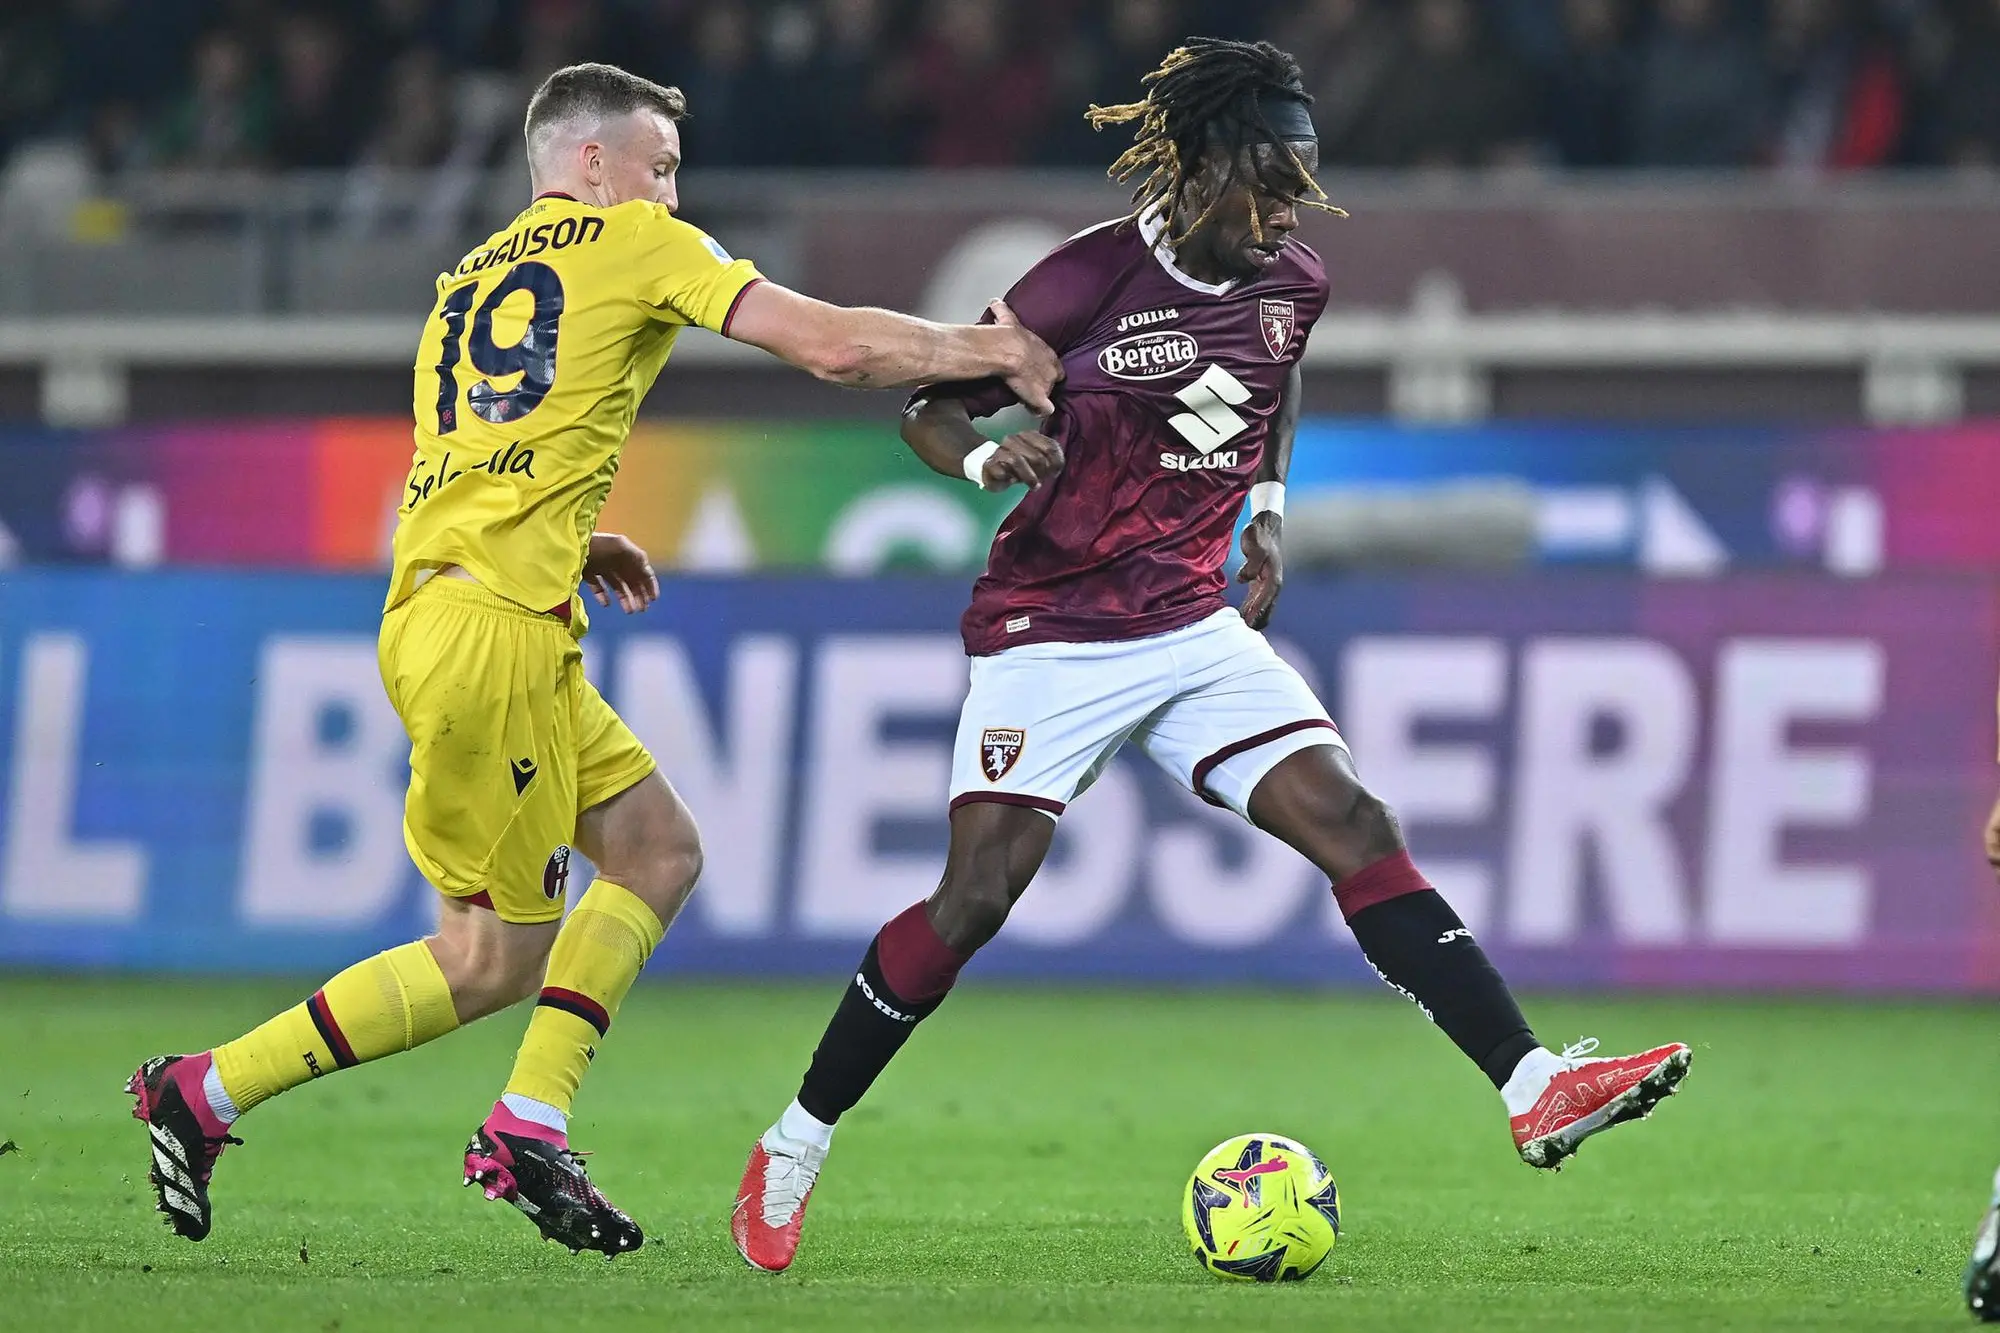 Torino's Yann Karamoh and Bologna's Lewis Ferguson in action during the Italian Serie A soccer match Torino FC vs Bologna FC at the Olimpico Grande Torino Stadium in Turin, Italy, 6 march 2023 ANSA/ALESSANDRO DI MARCO